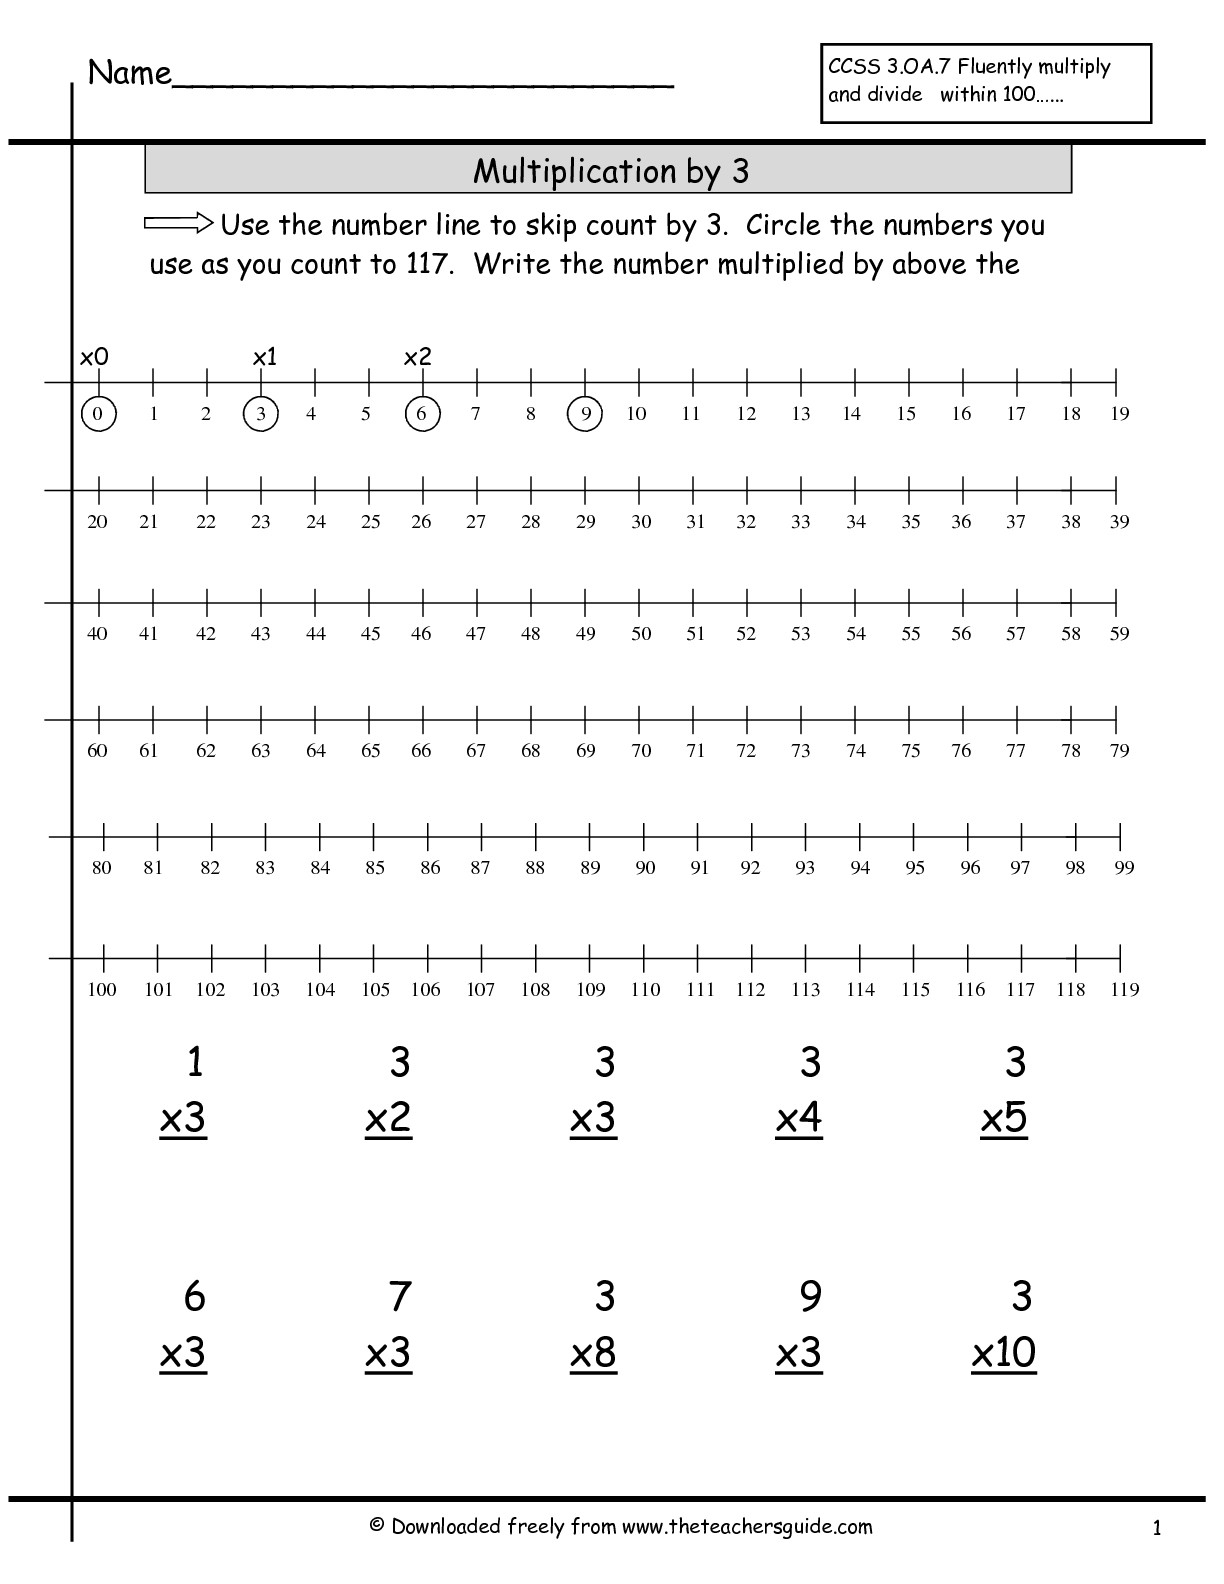 Multiplication Facts Worksheets From The Teacher&amp;#039;s Guide inside Multiplication Worksheets Number Line